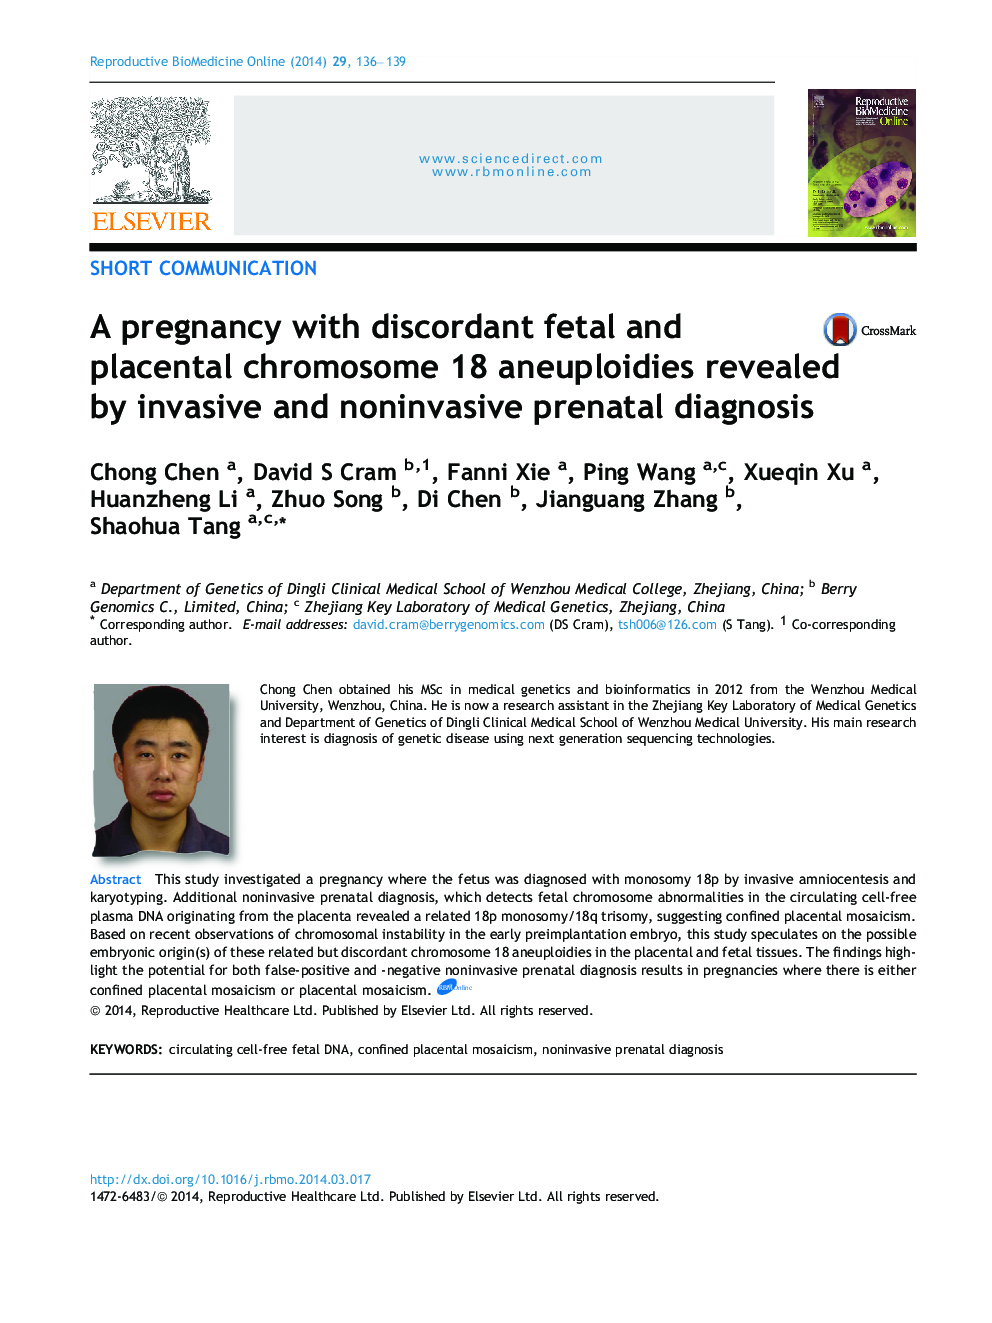 A pregnancy with discordant fetal and placental chromosome 18 aneuploidies revealed by invasive and noninvasive prenatal diagnosis 